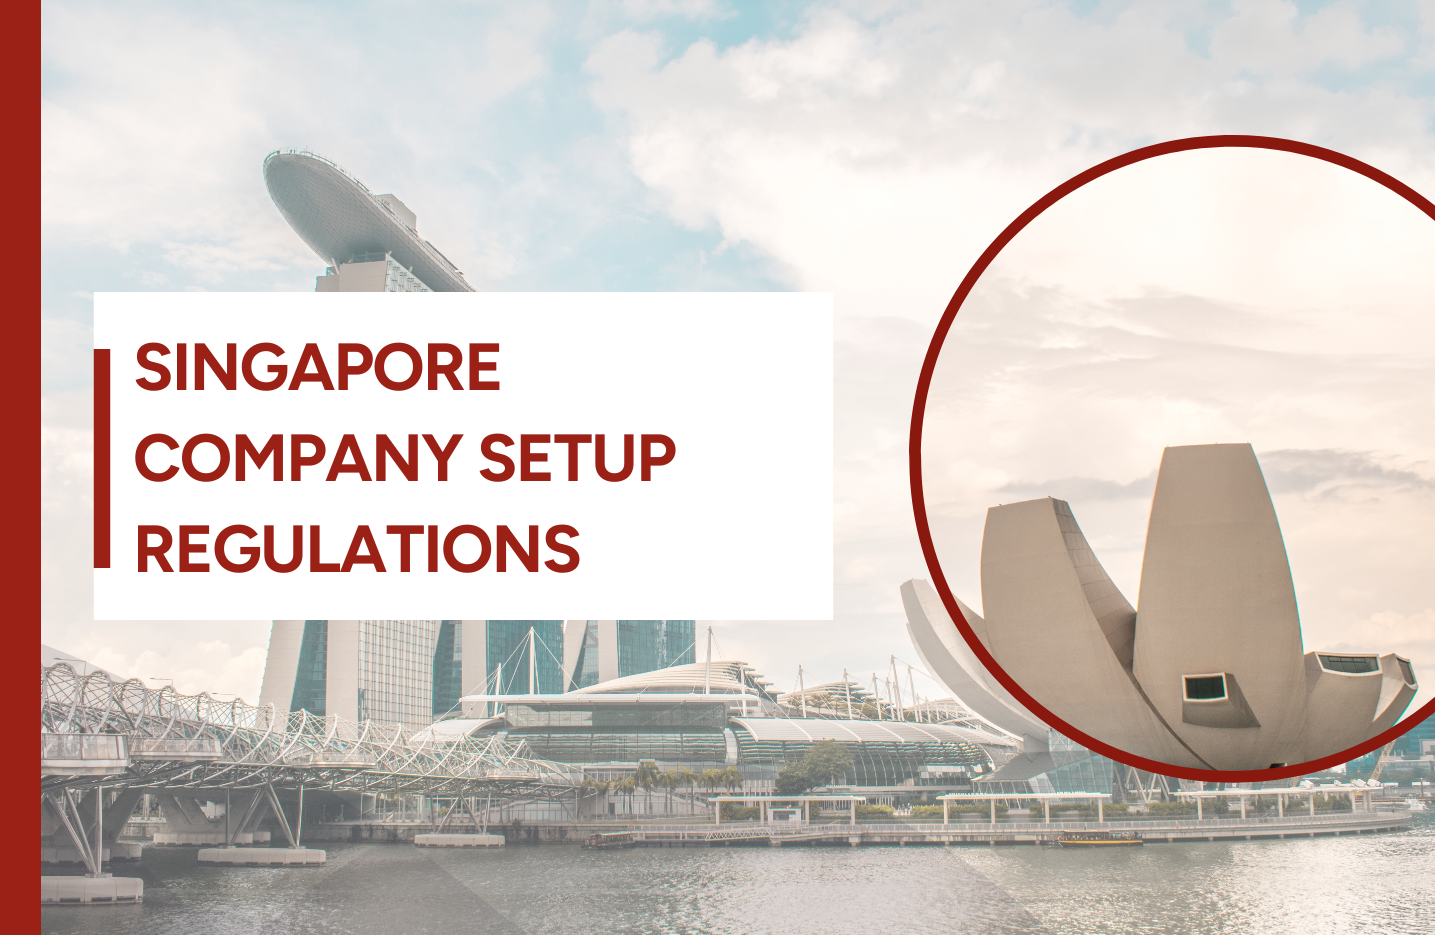 Comprehending regulations for setting up a company in Singapore